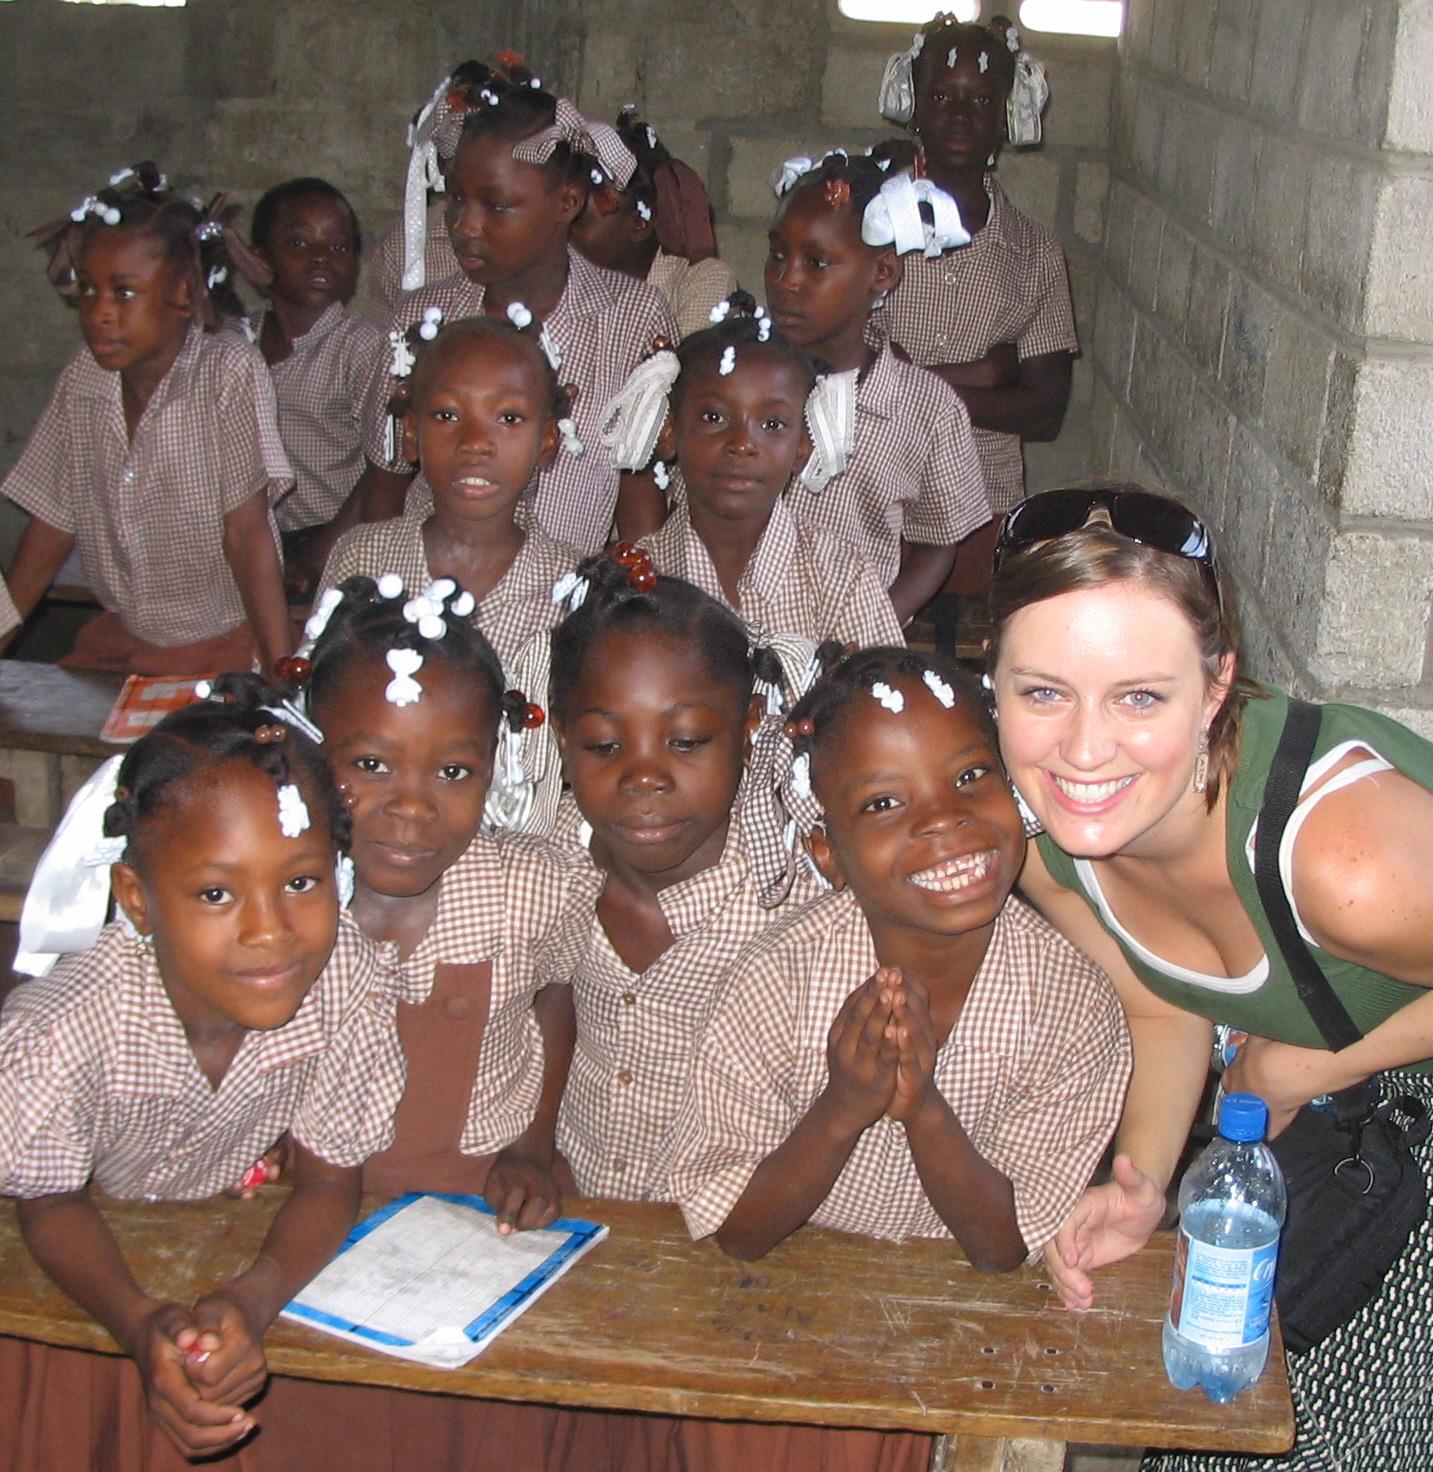 Brown at an American orphanage on the coast of Haiti